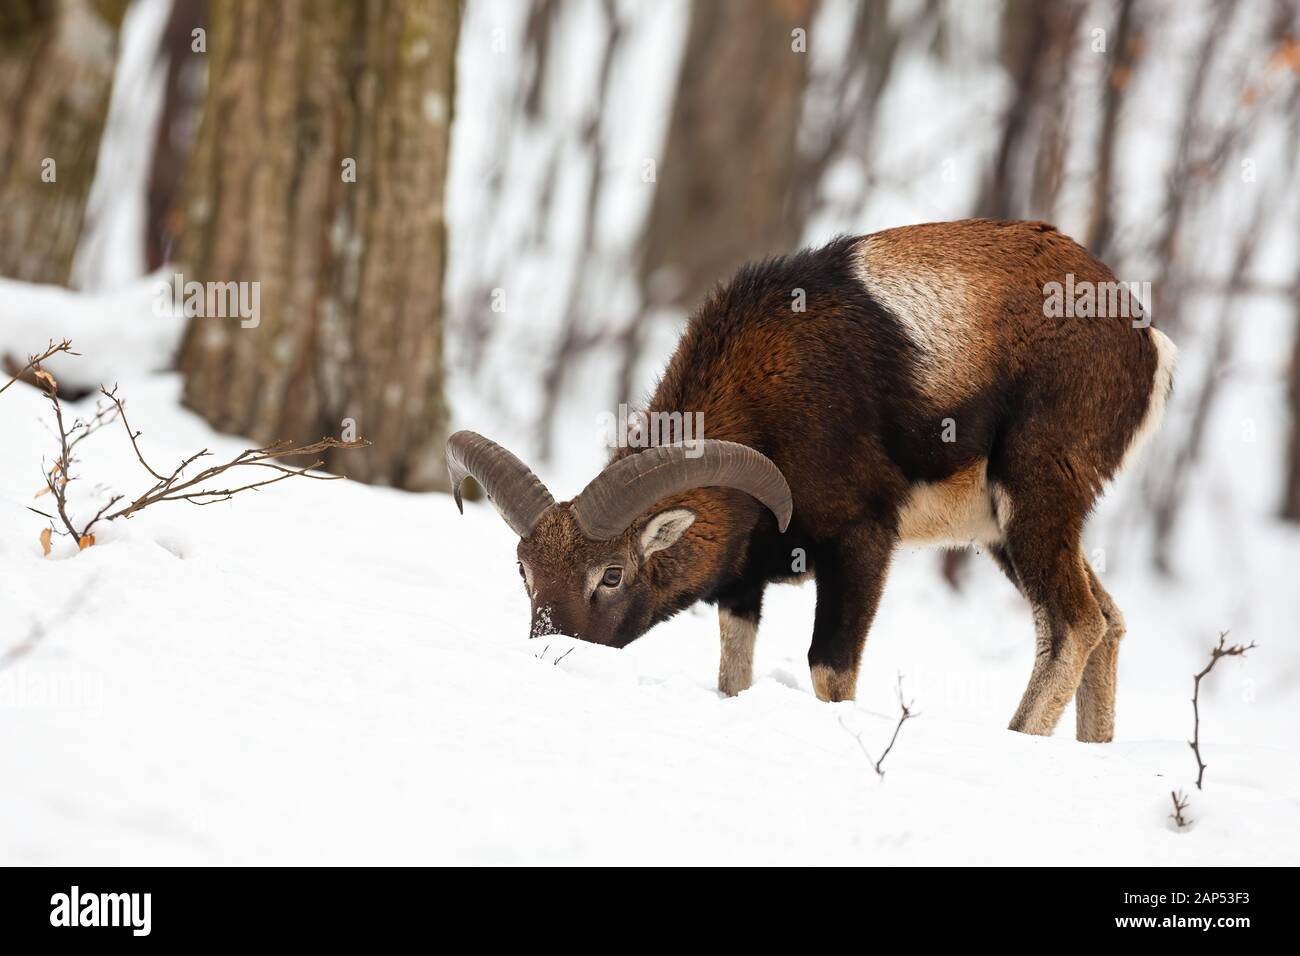 Mouflon ram feeding with head down in snow standing in forest in wintertime. Stock Photo